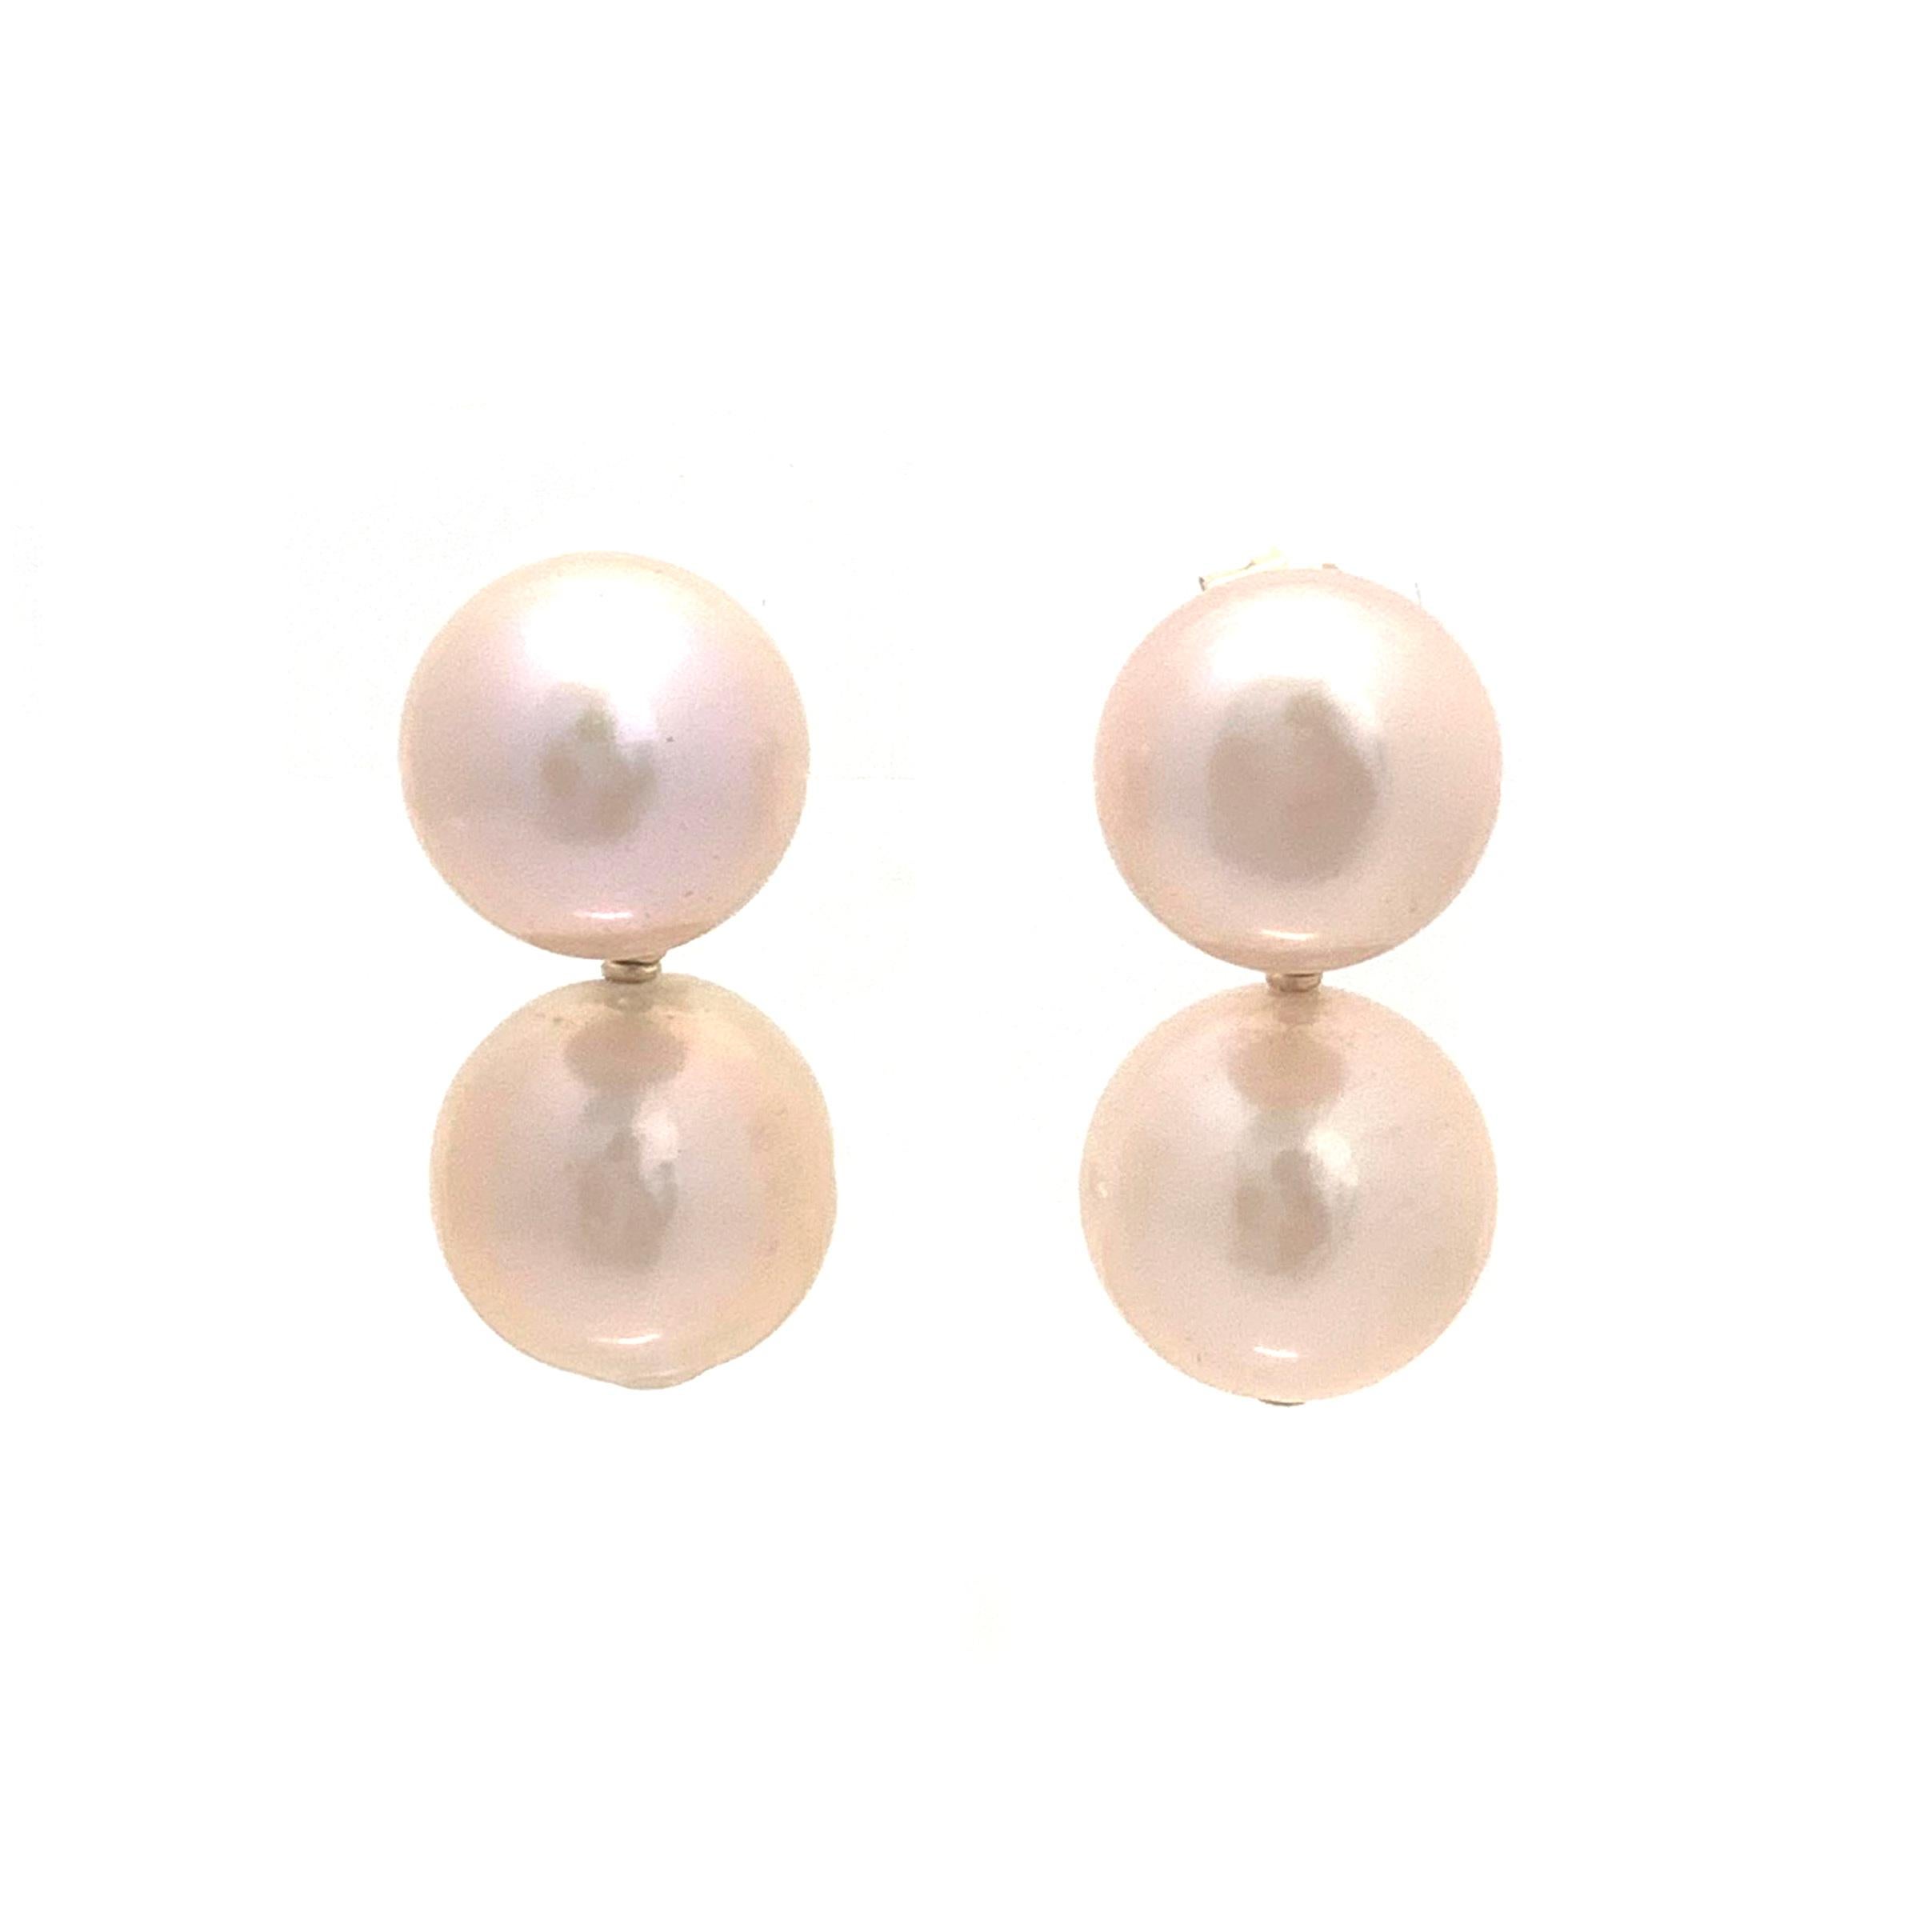 Classic elegant double peach-tone cultured pearl drop earrings. Beautiful lustrous peach-tone fresh water cultured pearl with 18k gold filled post and large friction back with comfort and properly secure. The top pearls measure 12mm and the bottom